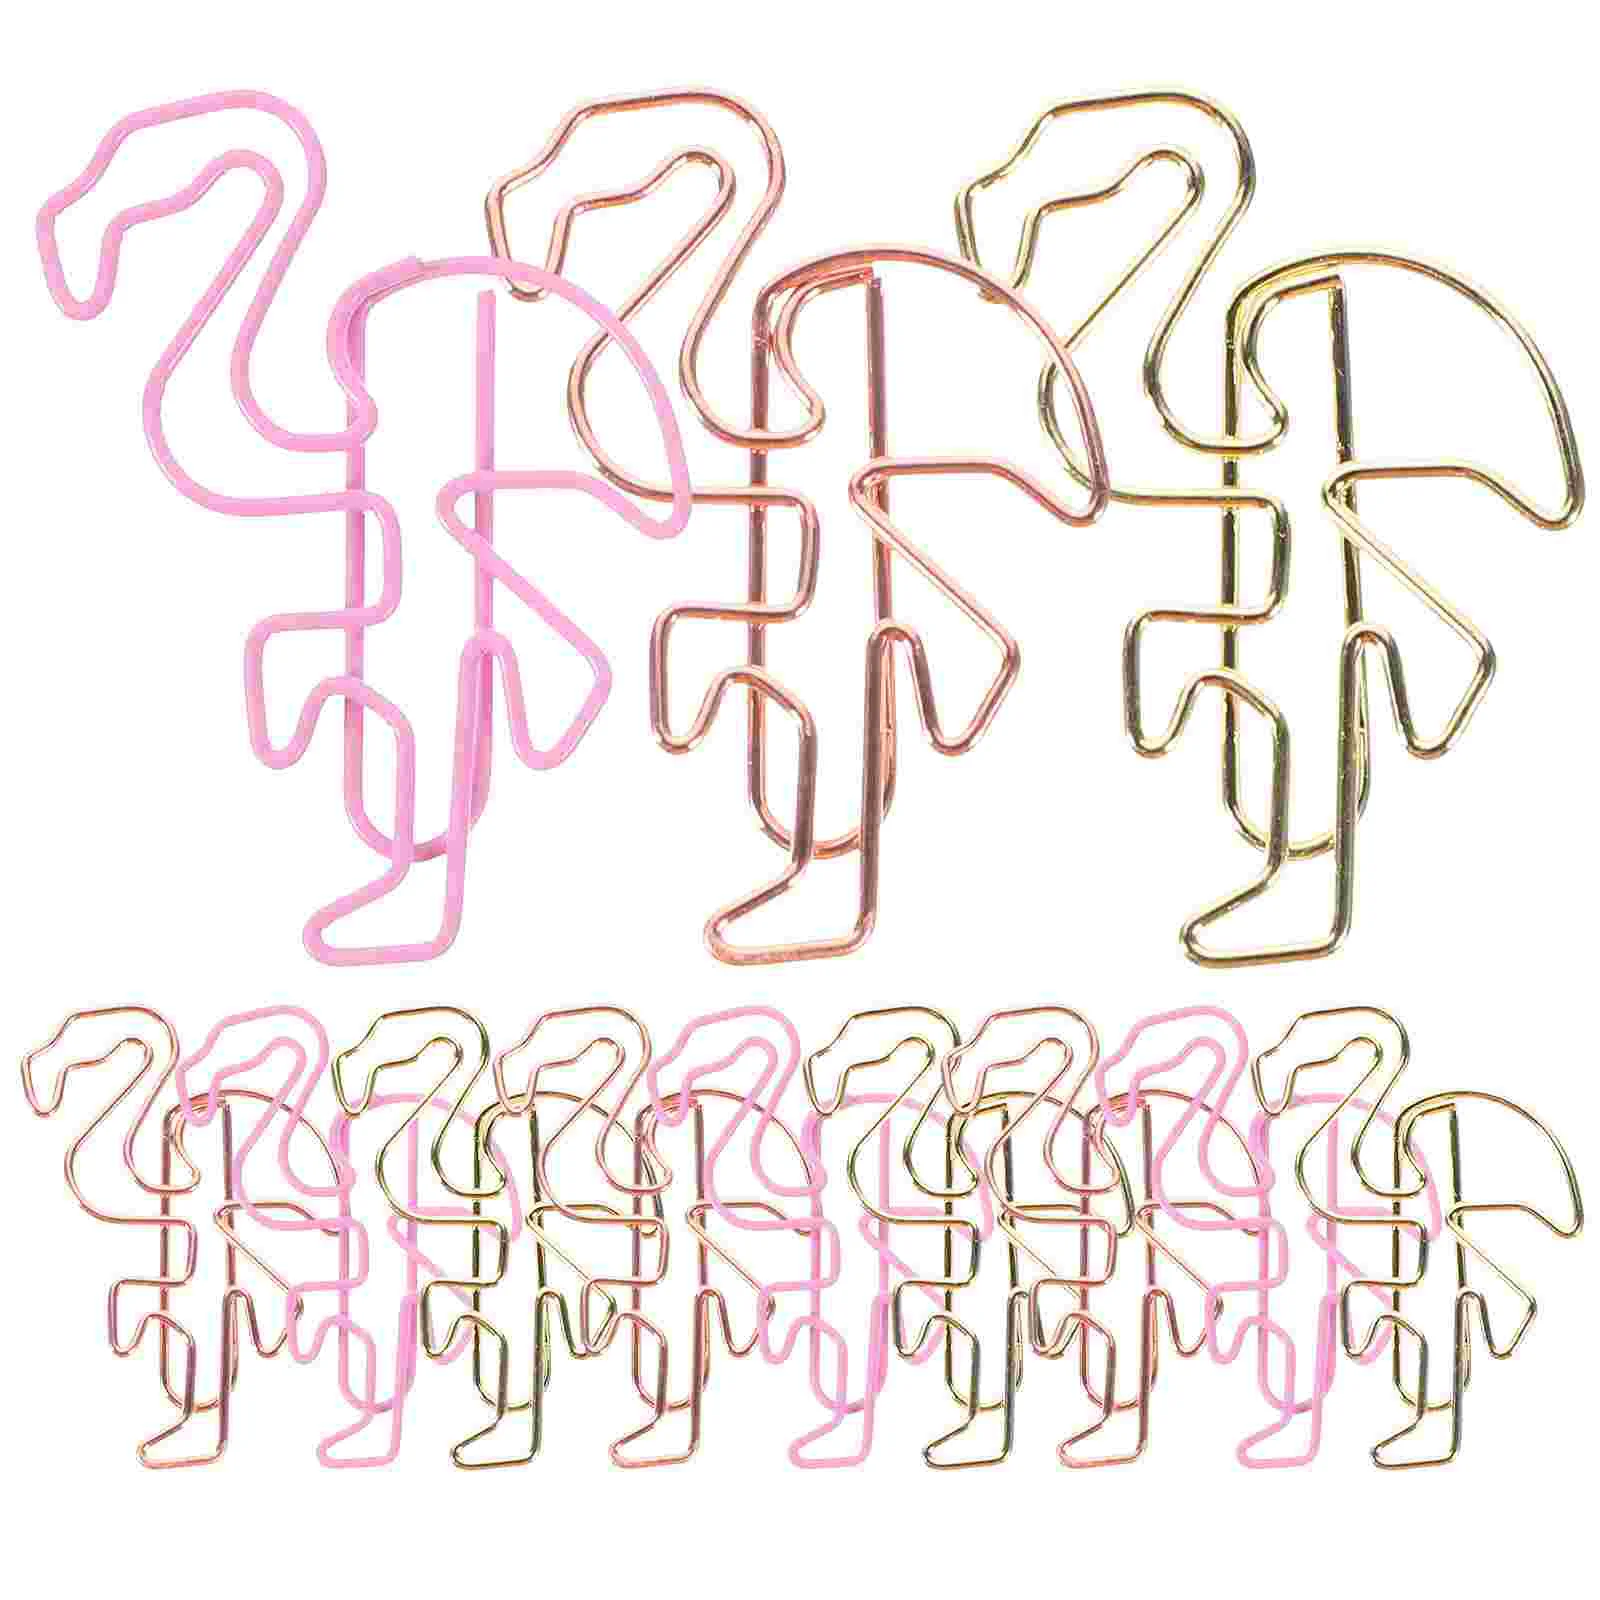 

15 Pcs Office Paper Clip Creative Shaped Clips Bookmark Metal Paperclips The Note Document for File Folder